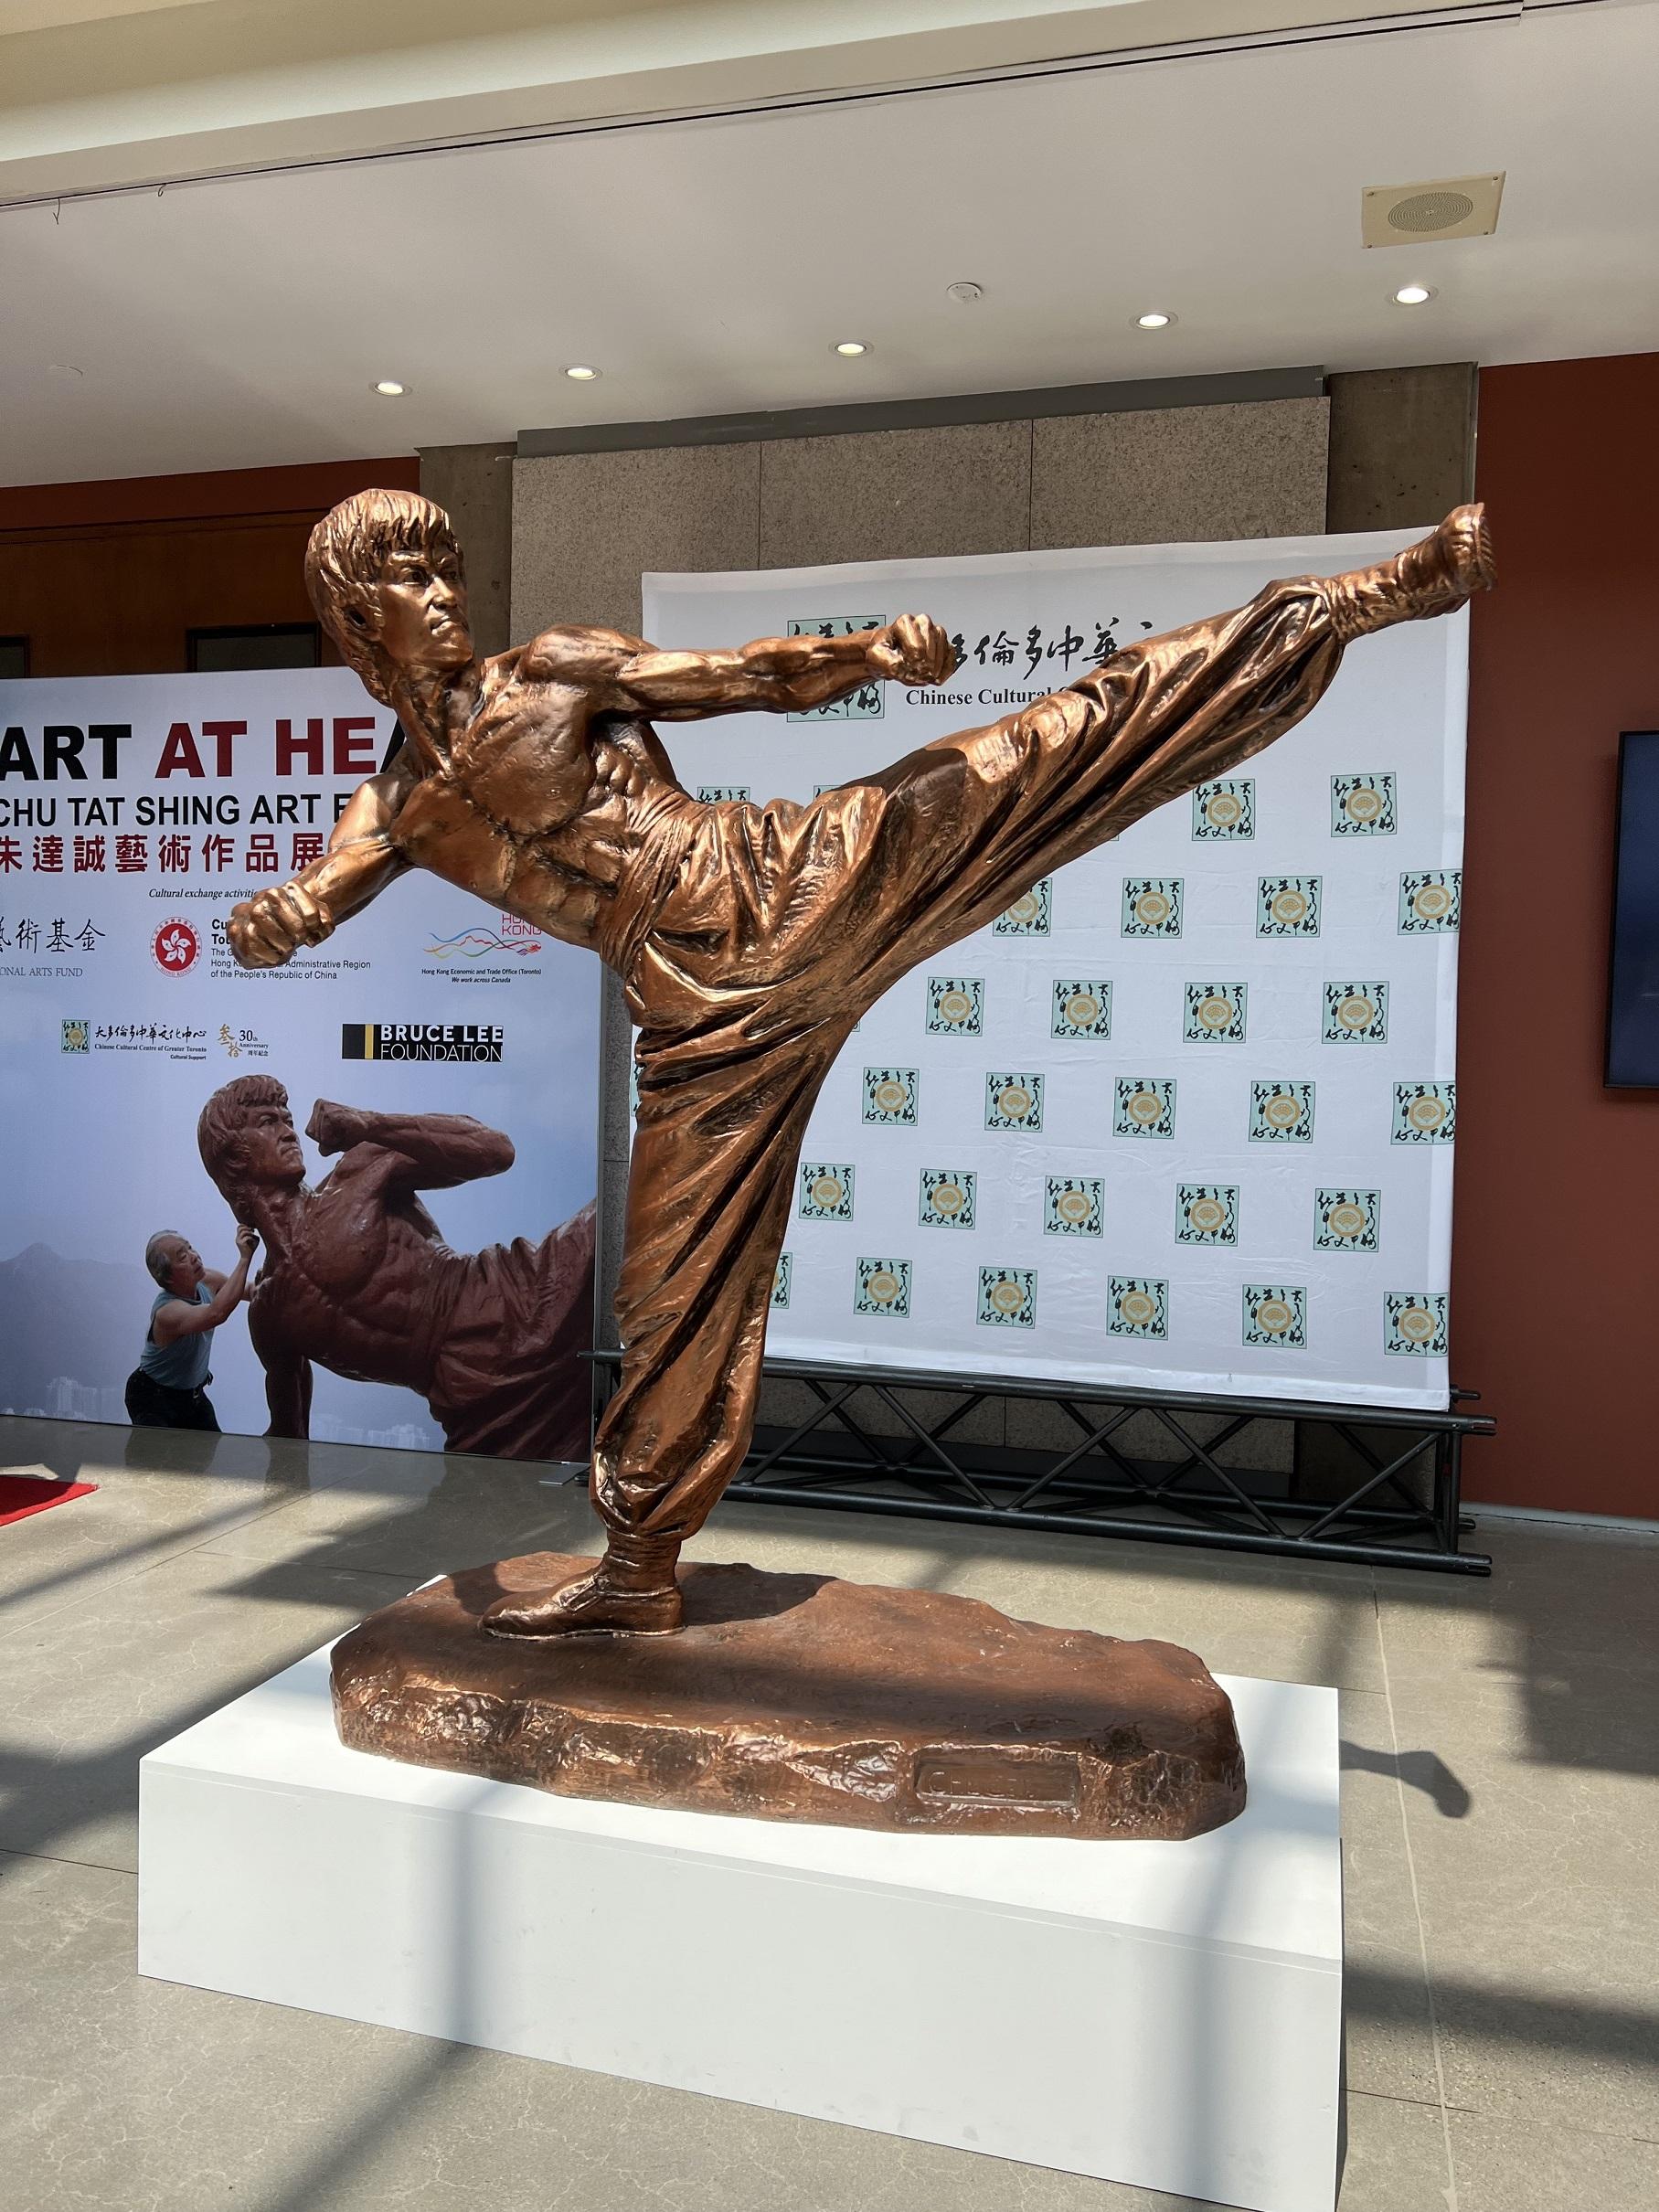 Photo shows the Bruce Lee sculpture, which is designed and created by Master Chu Tat Shing for the "Art at Heart - Chu Tat Shing Art Exhibition" in Toronto.